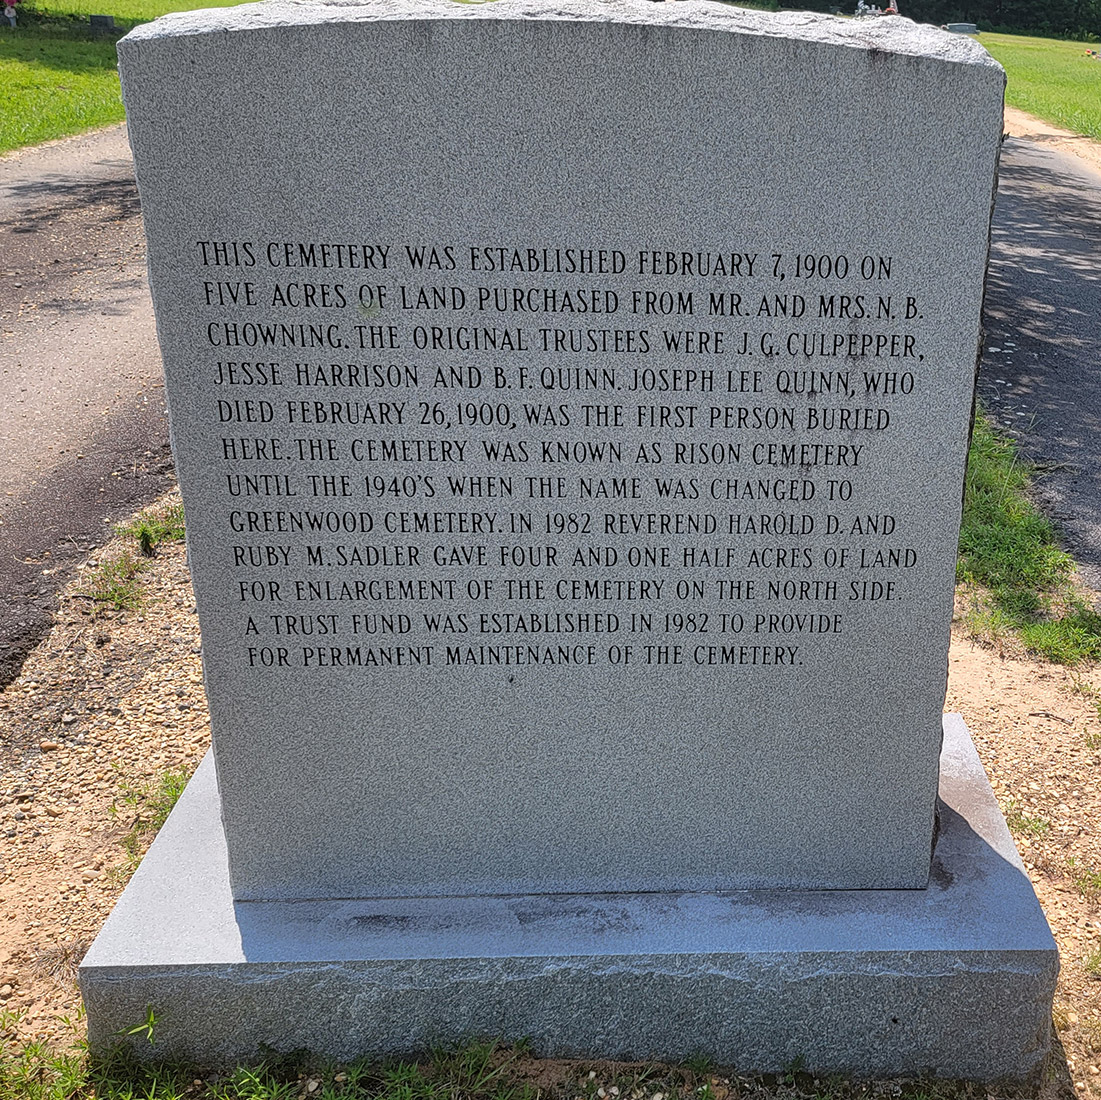 Concrete monument engraved with details about the establishment of the cemetery on February 7